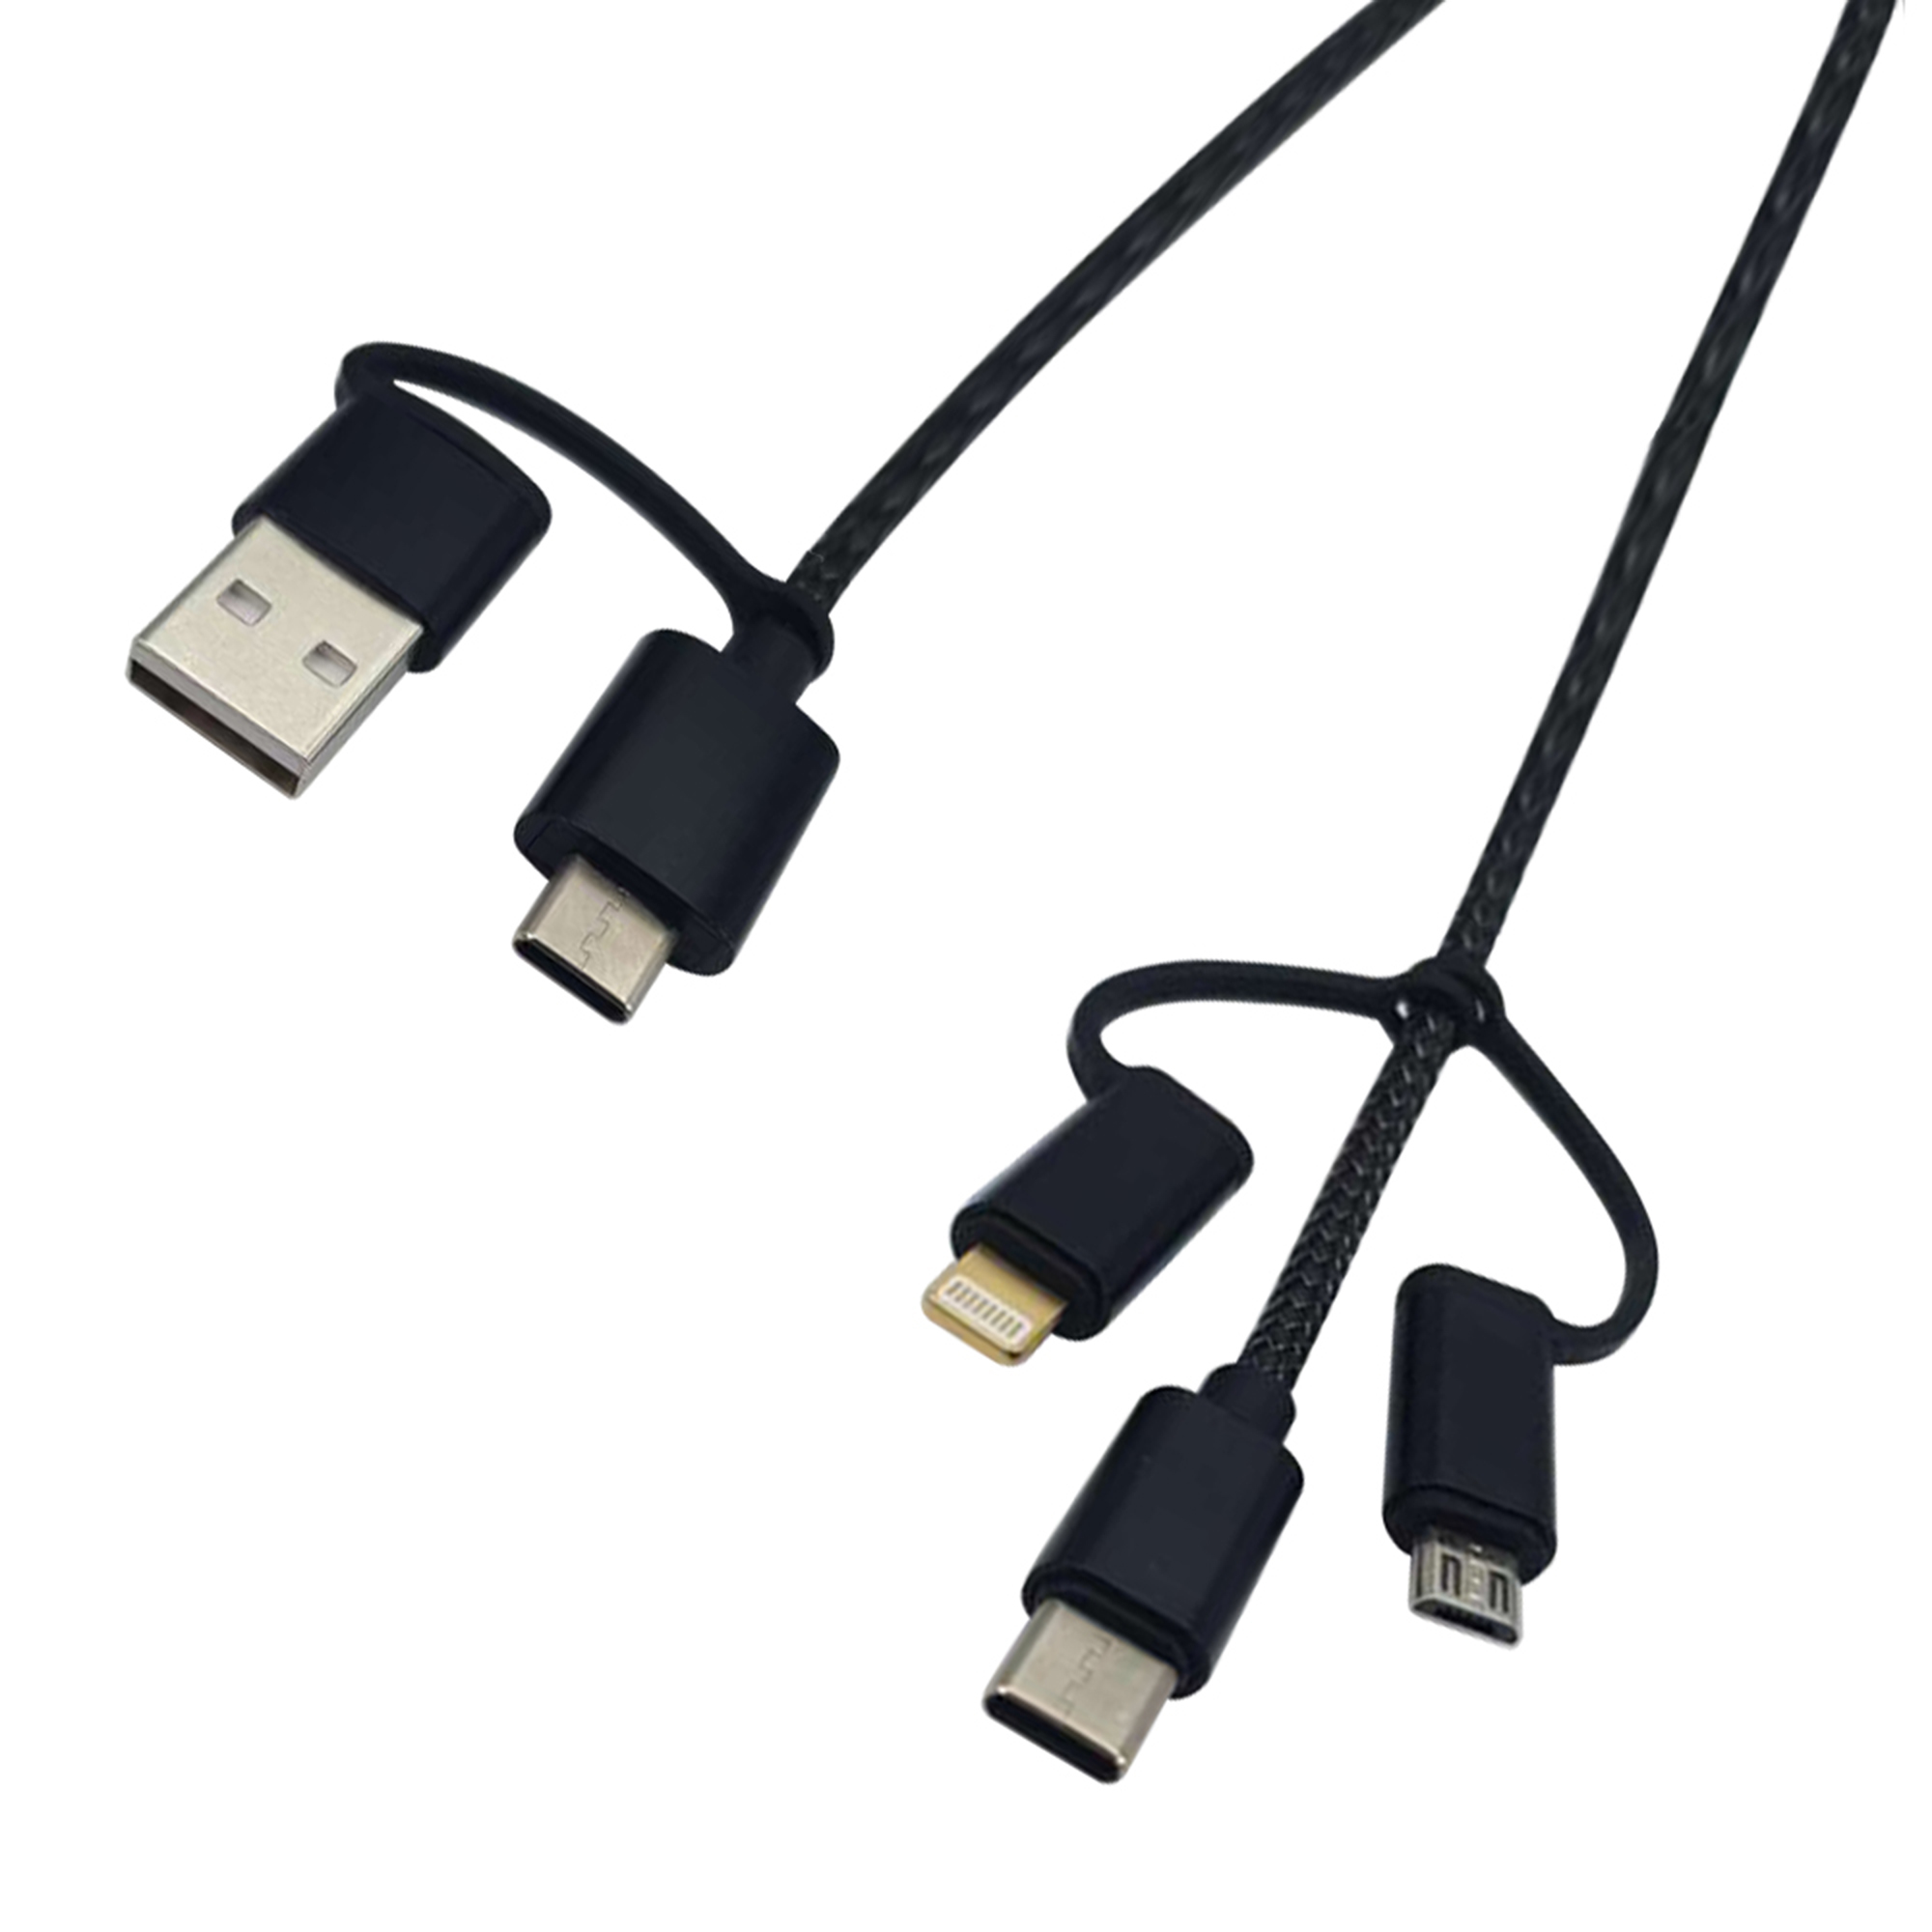 Photos - Cable (video, audio, USB) connektgear 1m USB 3 in 1 Charge and Sync Cable Type C and Type A to T 26